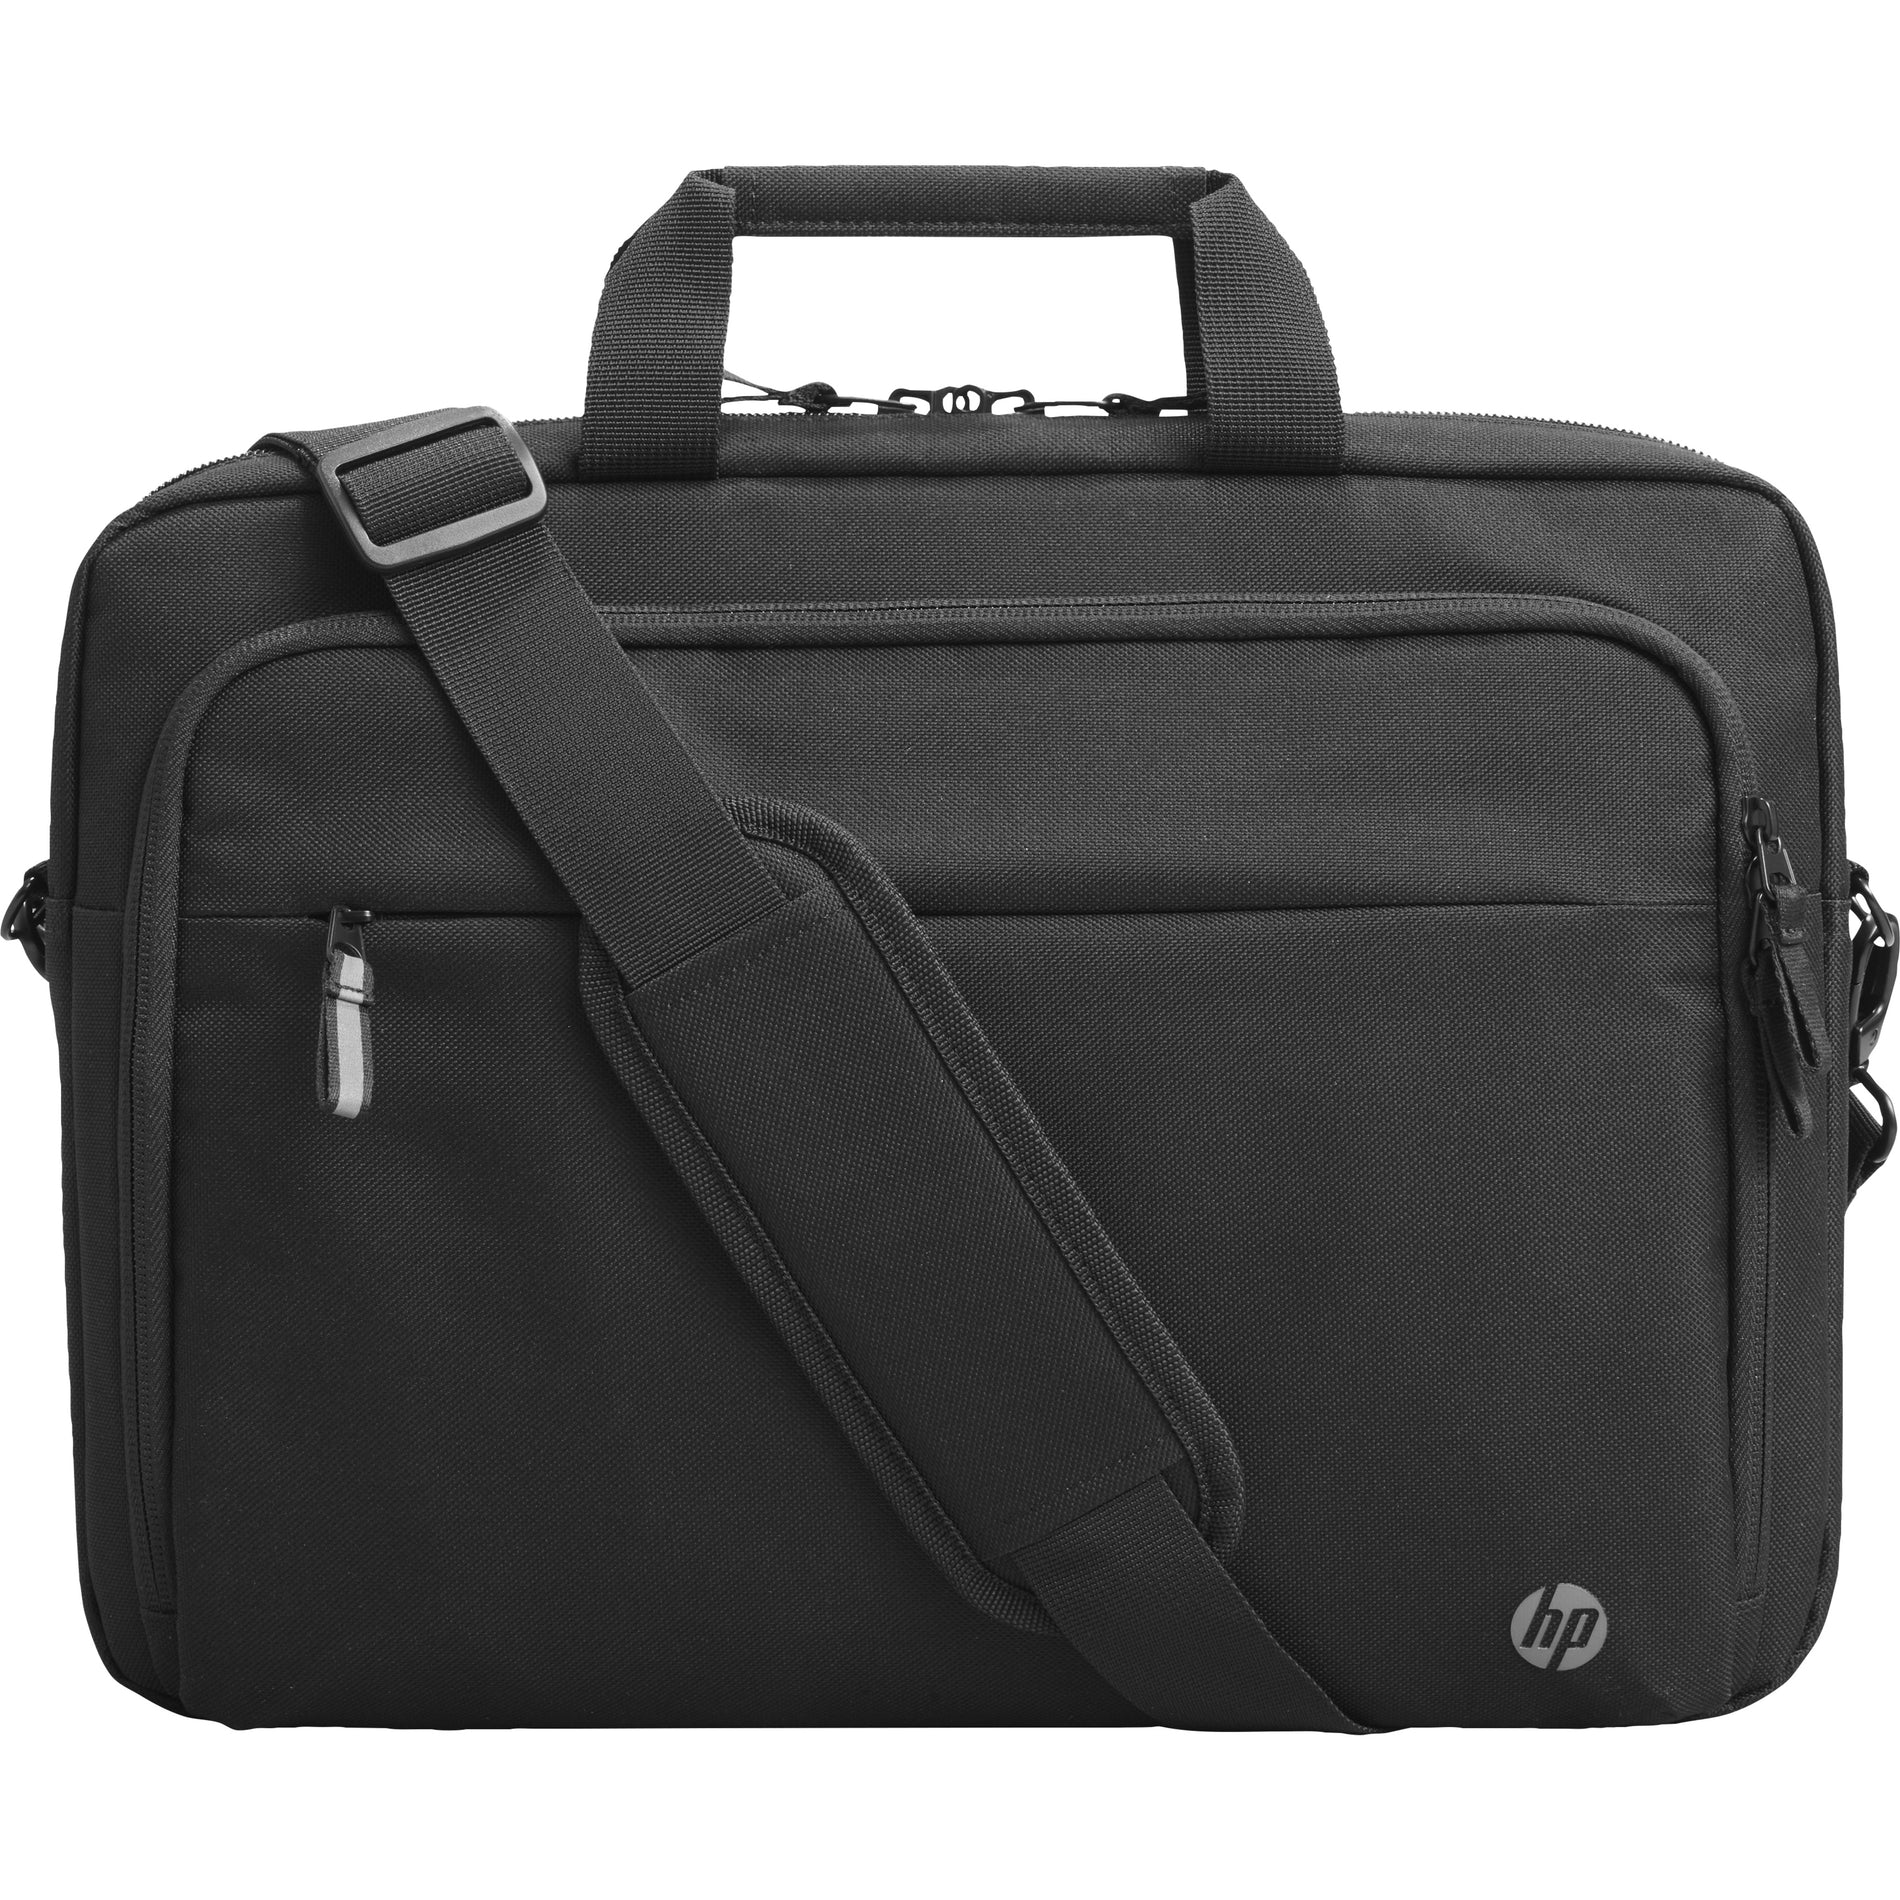 HP 500S7AA Professional 15.6-inch Laptop Bag, Messenger Style, Black, for Notebook, Smartphone, Accessories